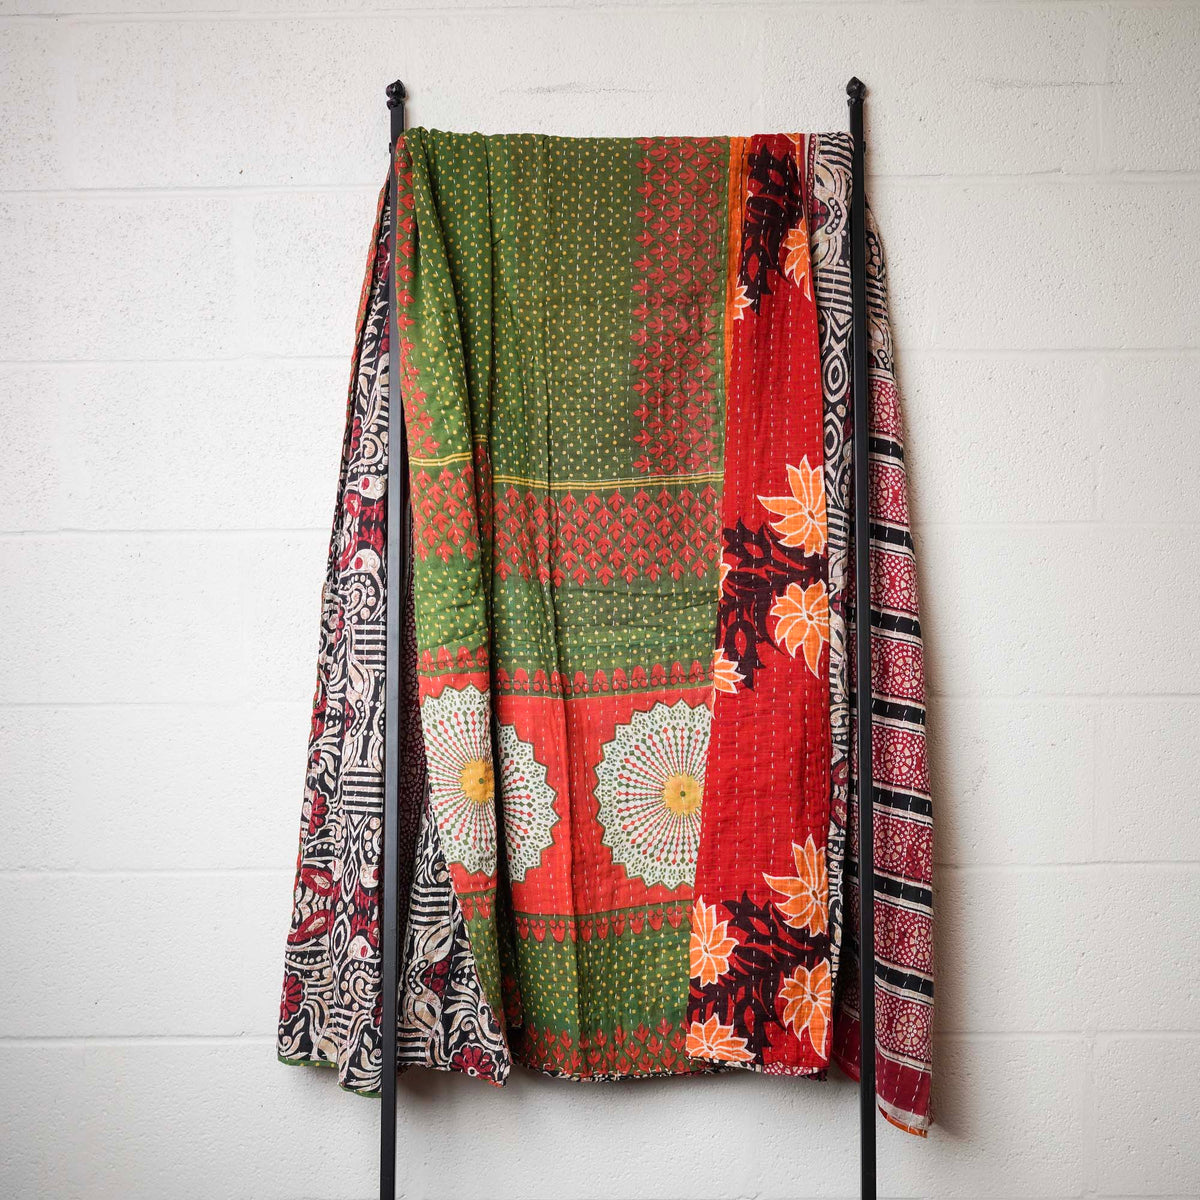 Kantha India Blanket One-of-a-Kind Handcrafted Quilted Pattern Throw ~ No. K-00578